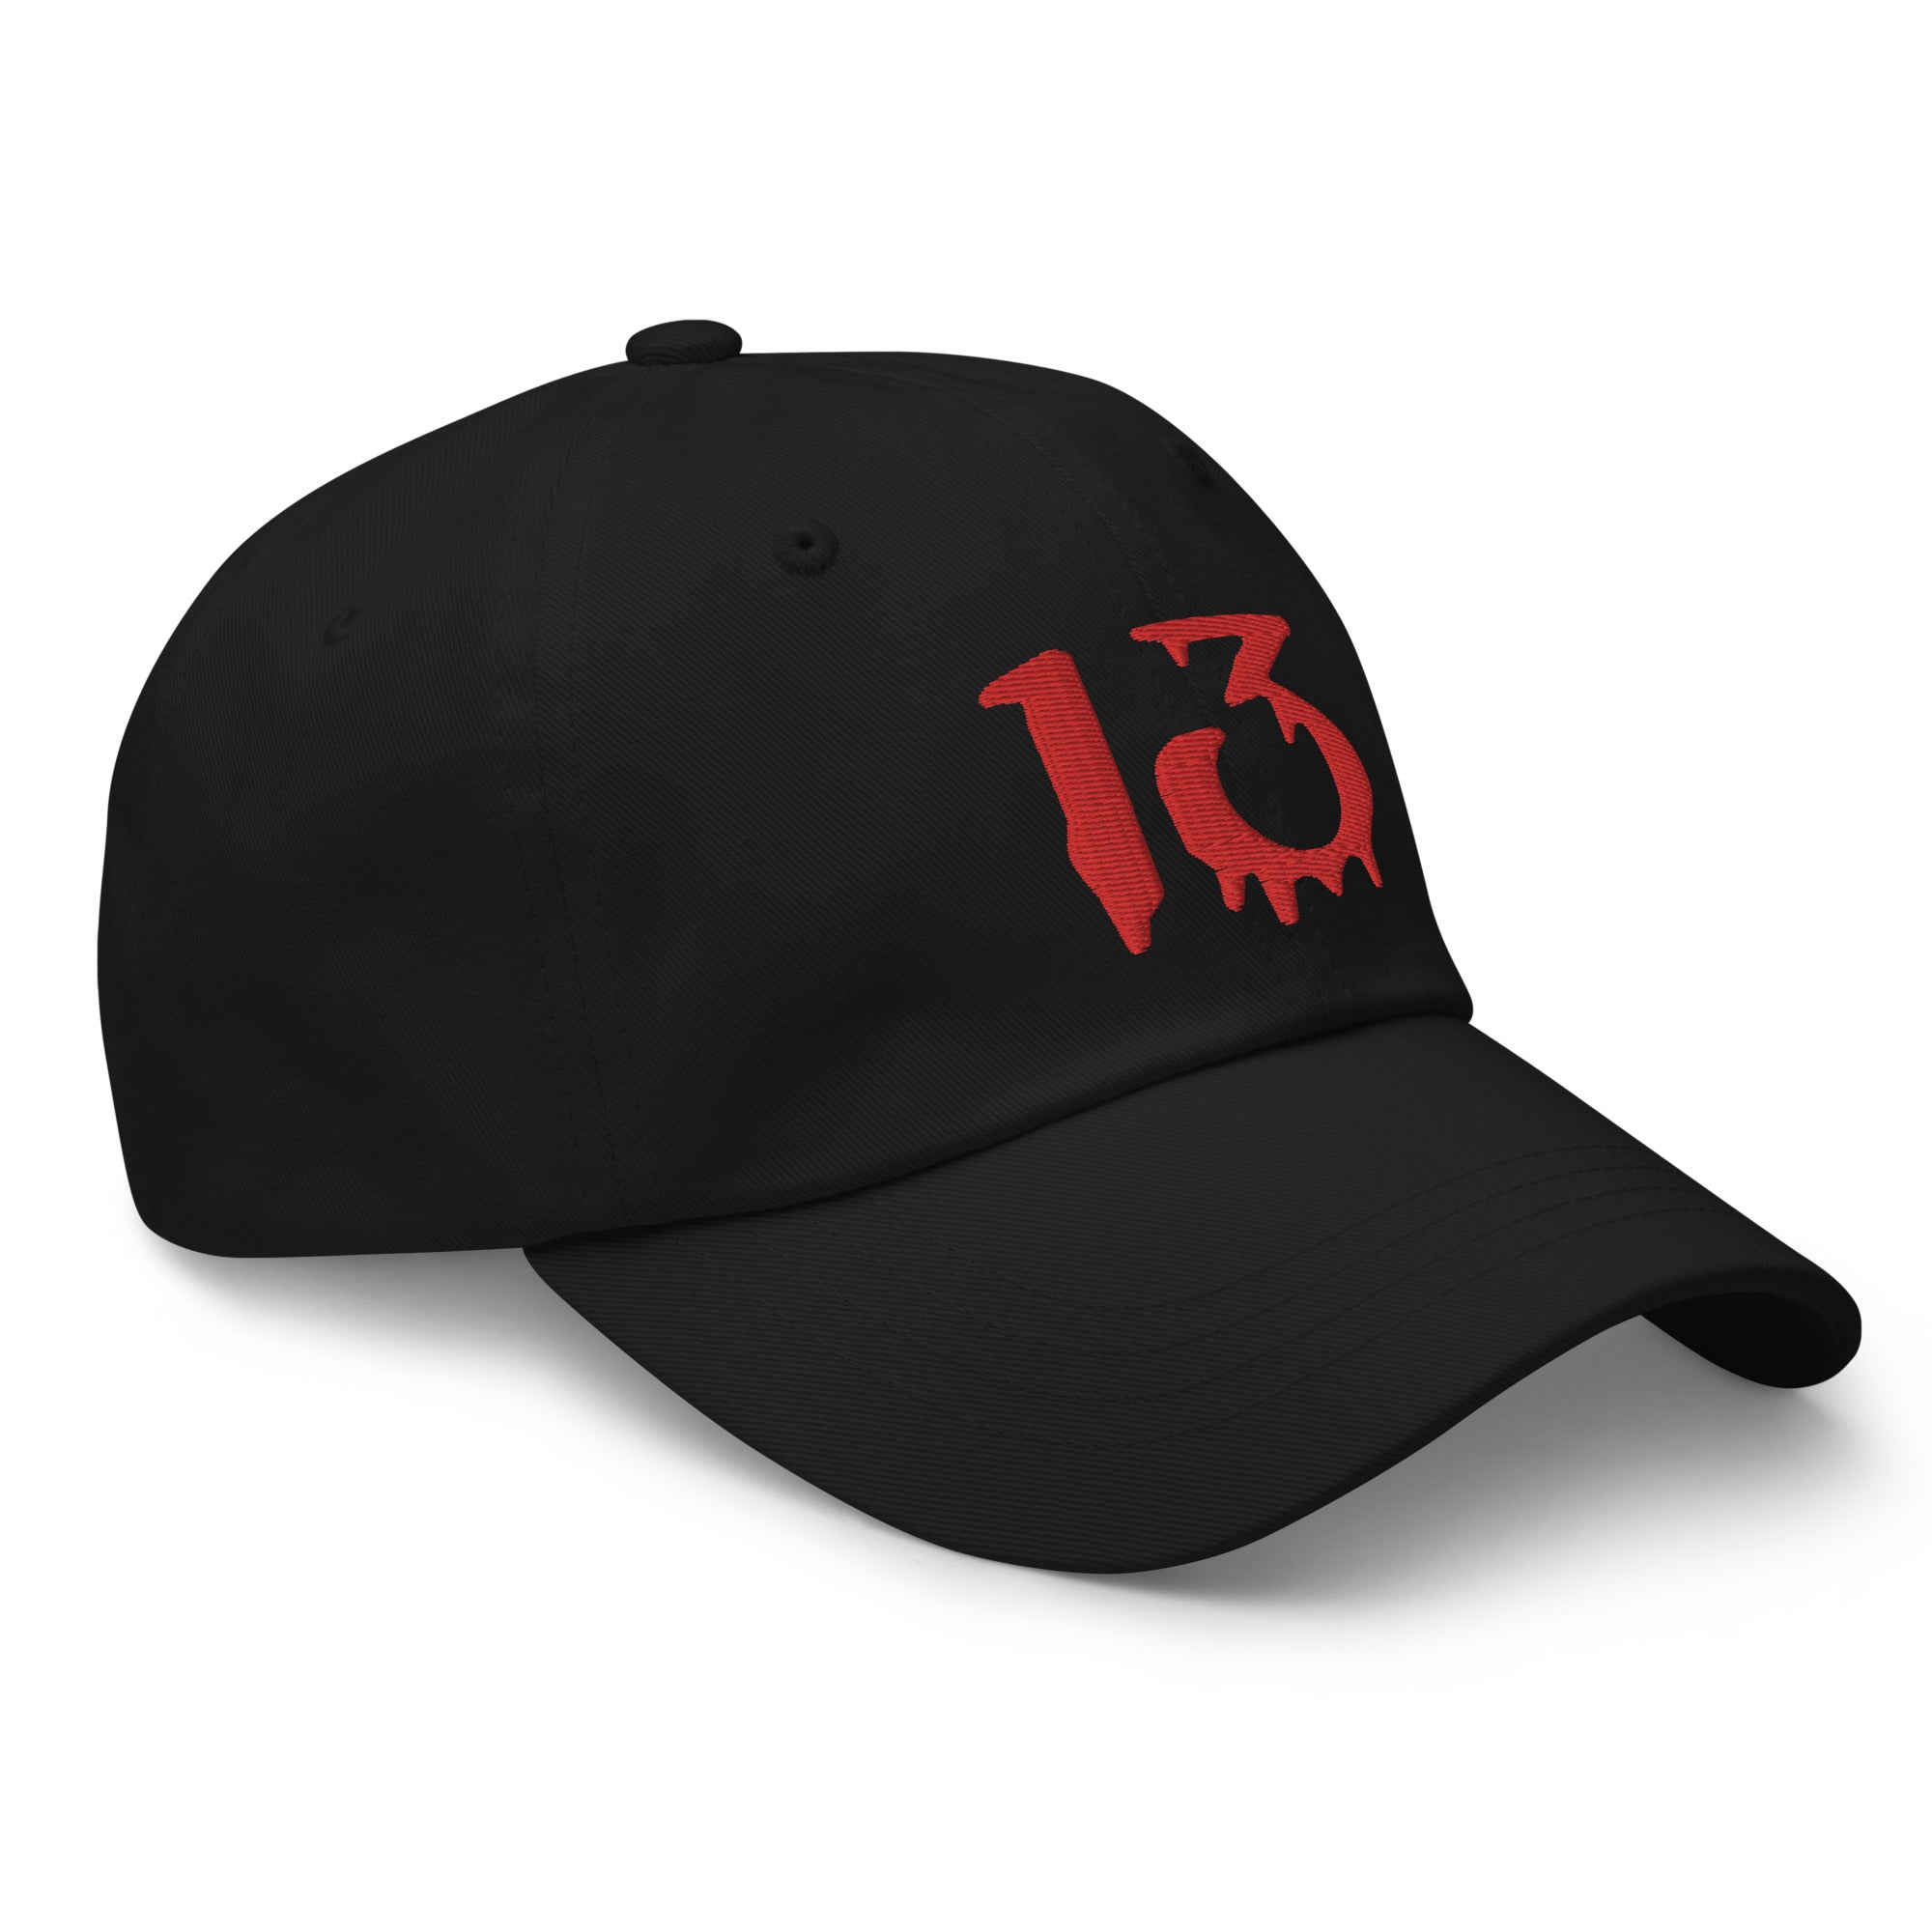 Bloody Number 13 Lucky Halloween Embroidered Baseball Cap Dad hat Red Thread - Edge of Life Designs